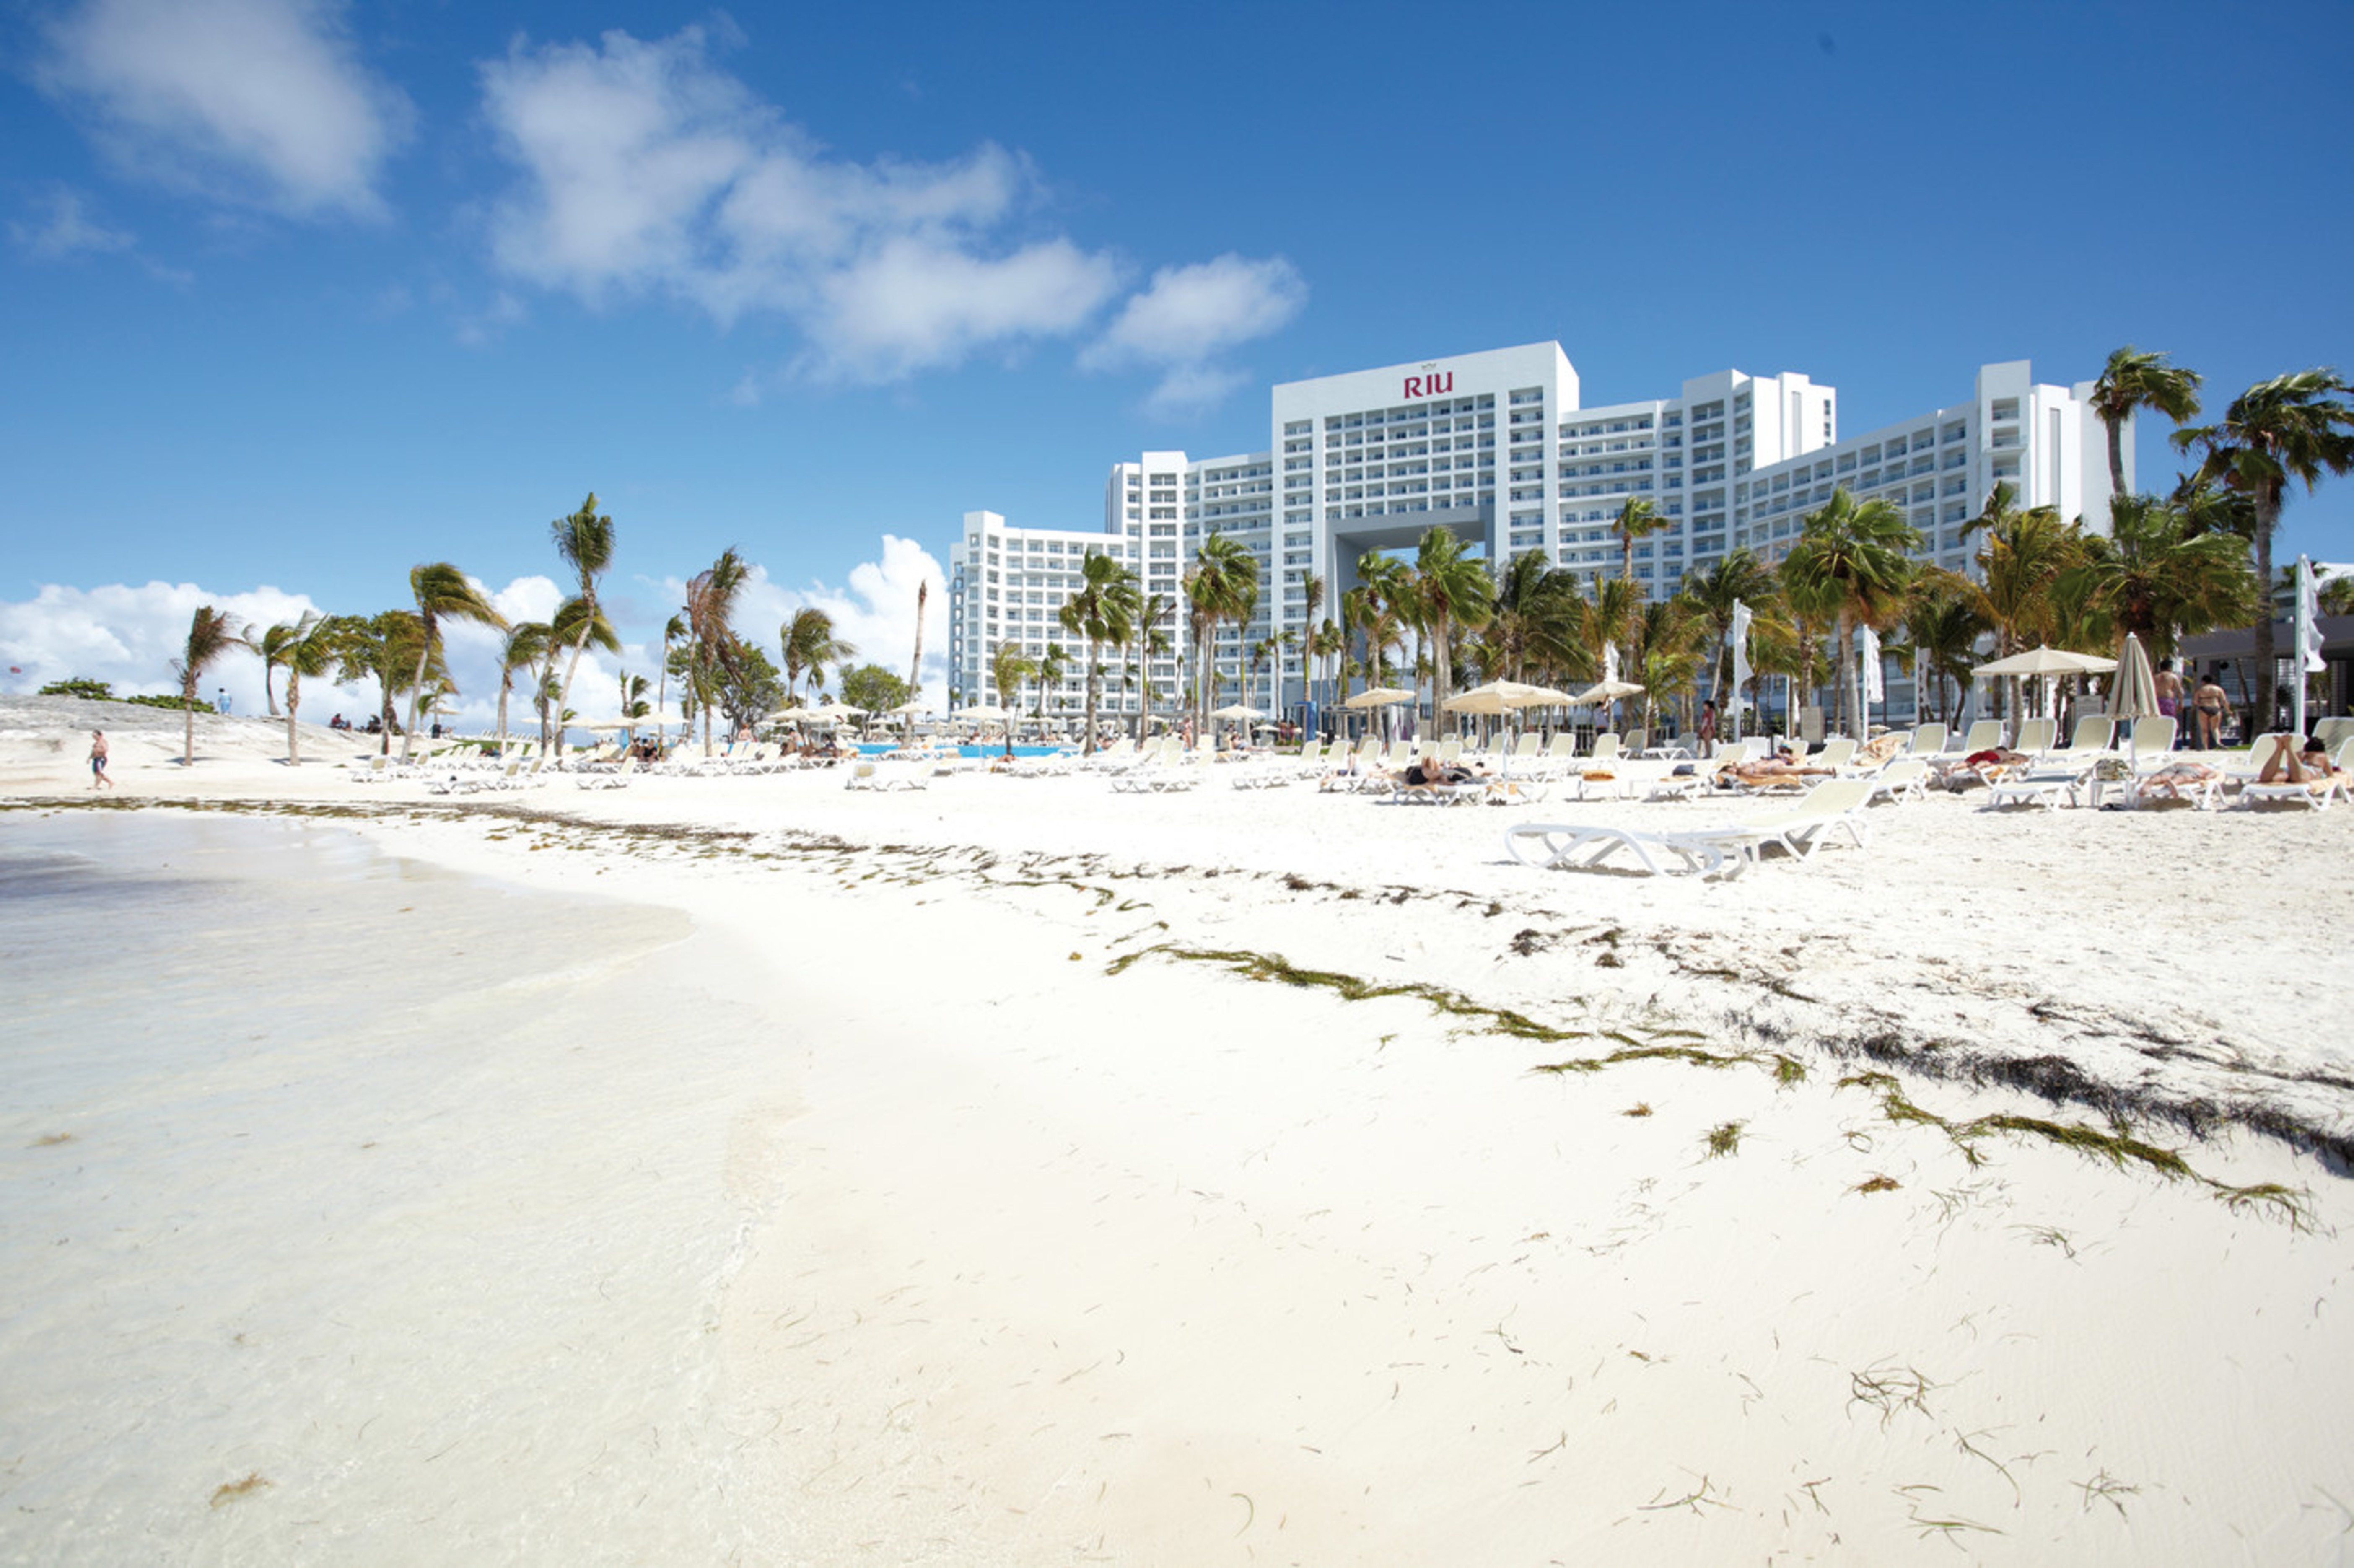 Enjoy everything Cancún has to offer at the Hotel Riu Palace Peninsula